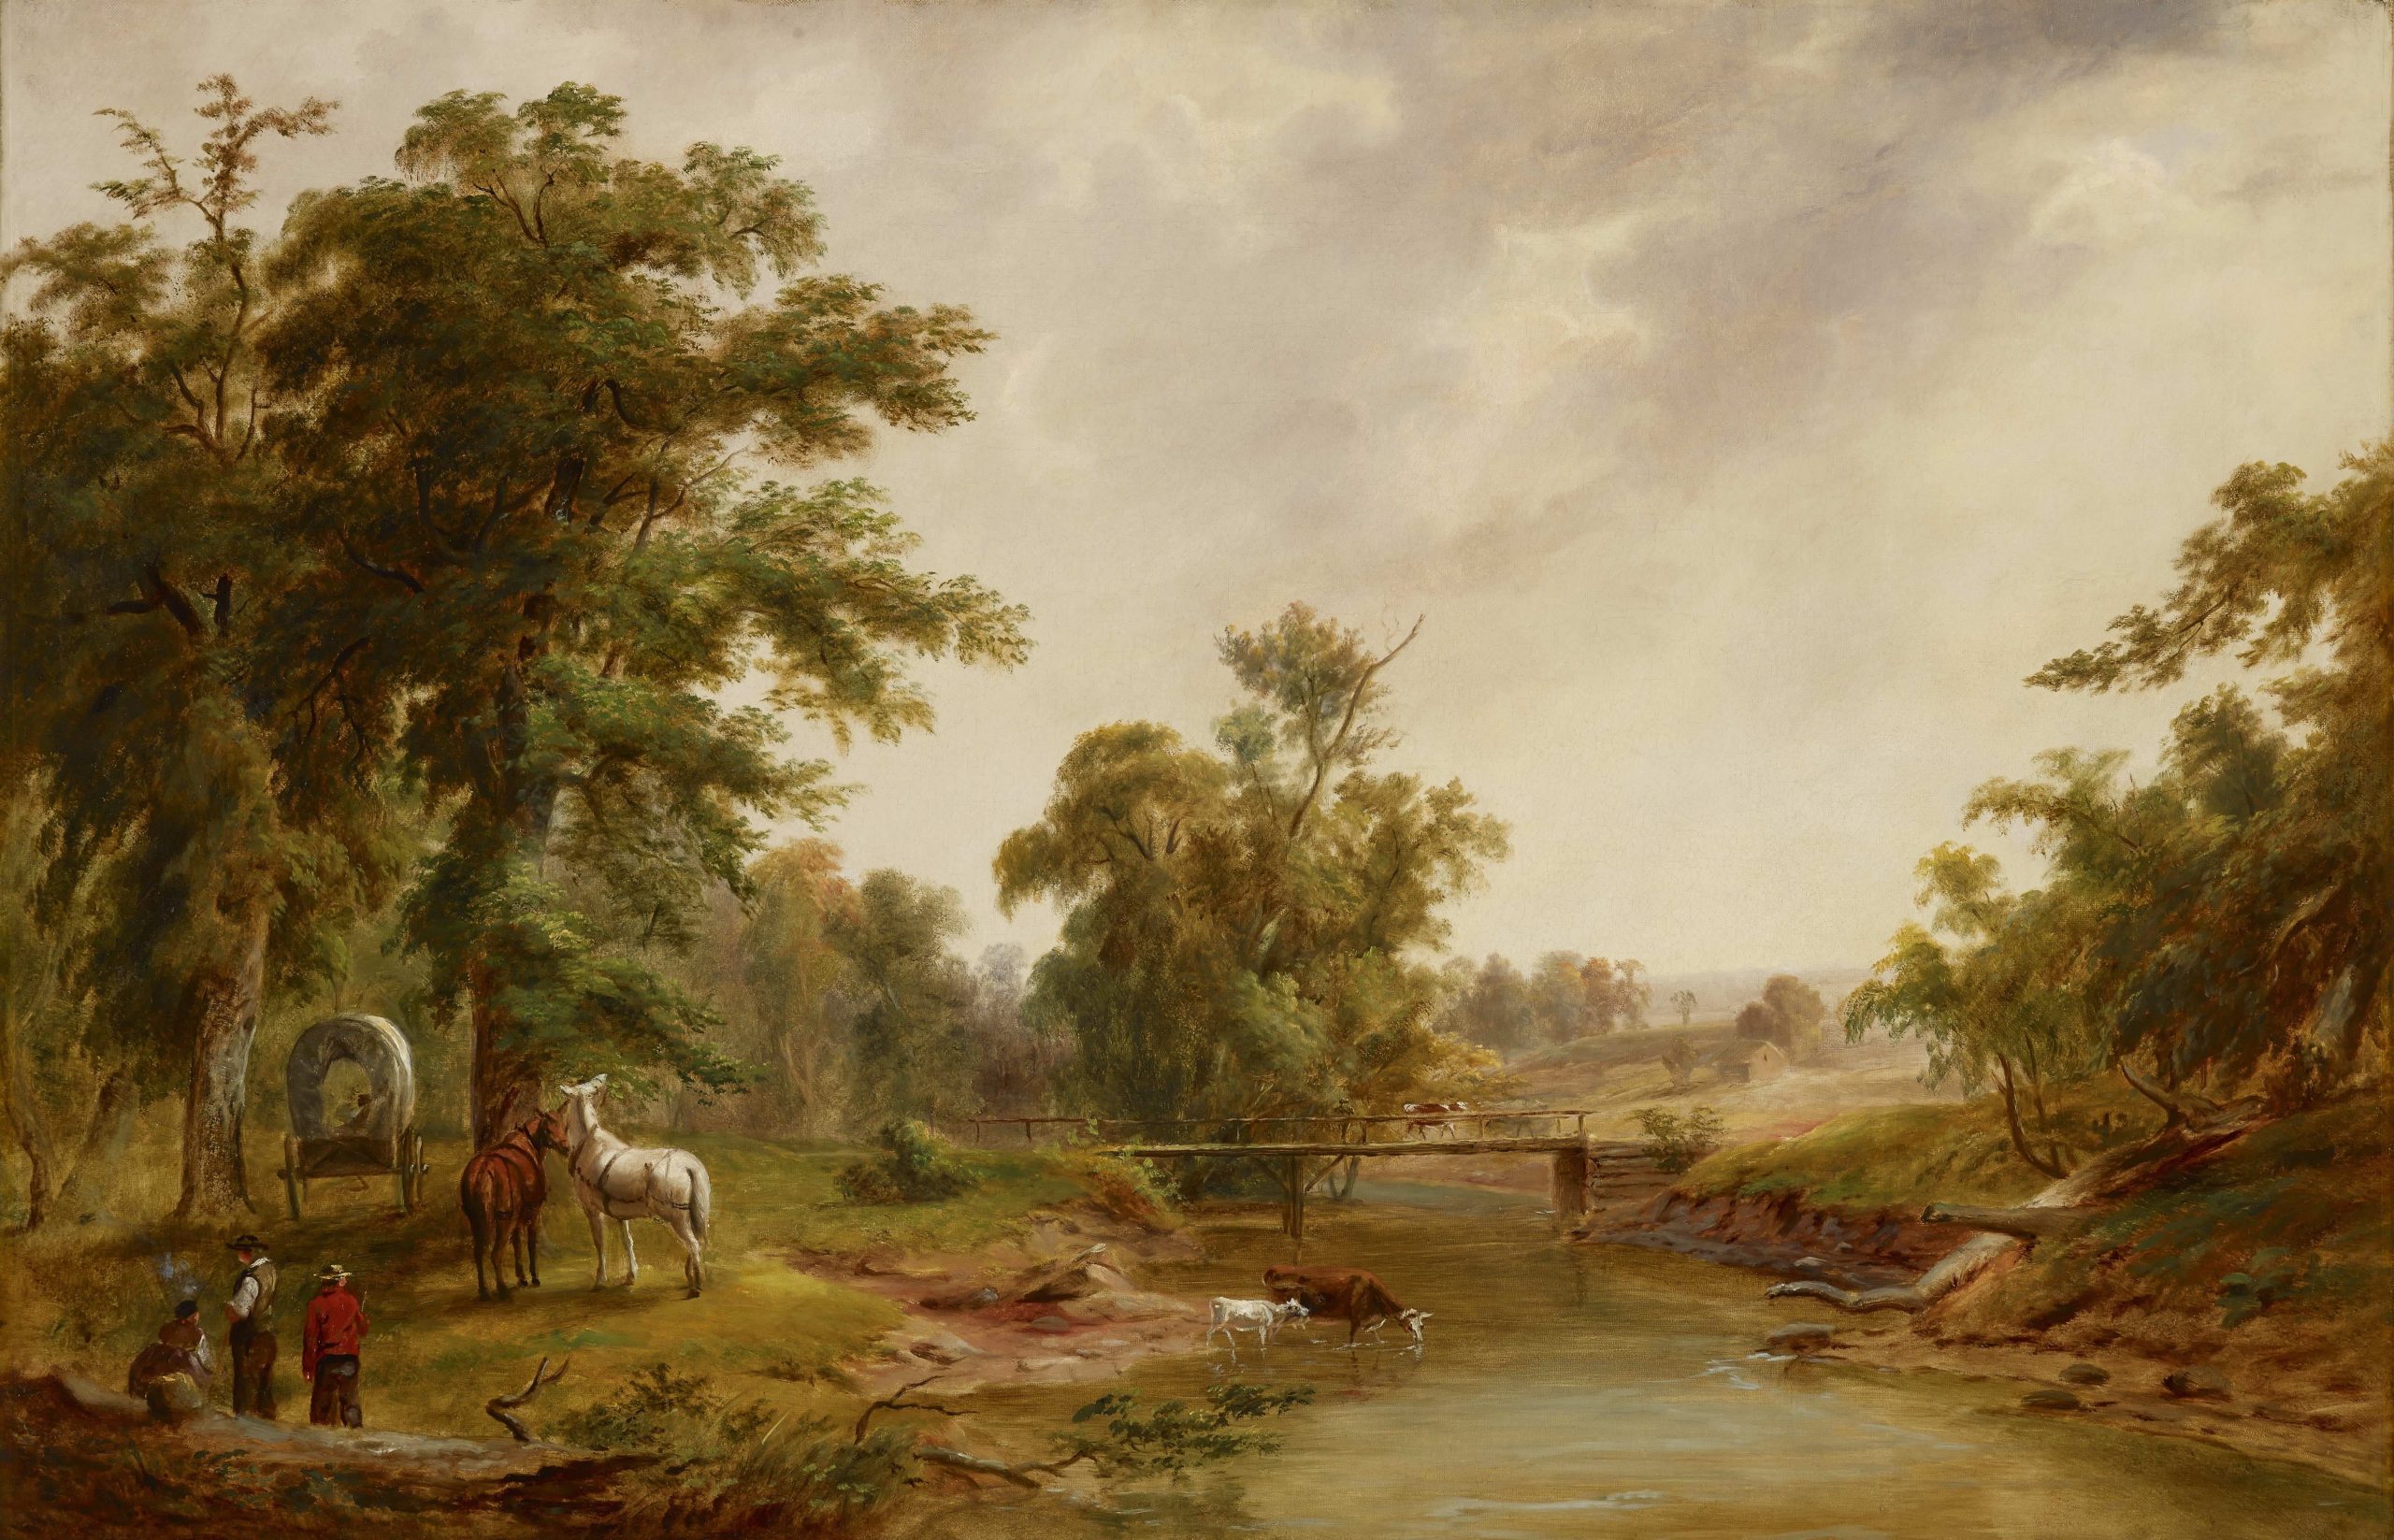 A painting of a creek running under a bridge. Cattle are drinking from the creek while people sit on the banks. A wagon and two horses are also on the banks.